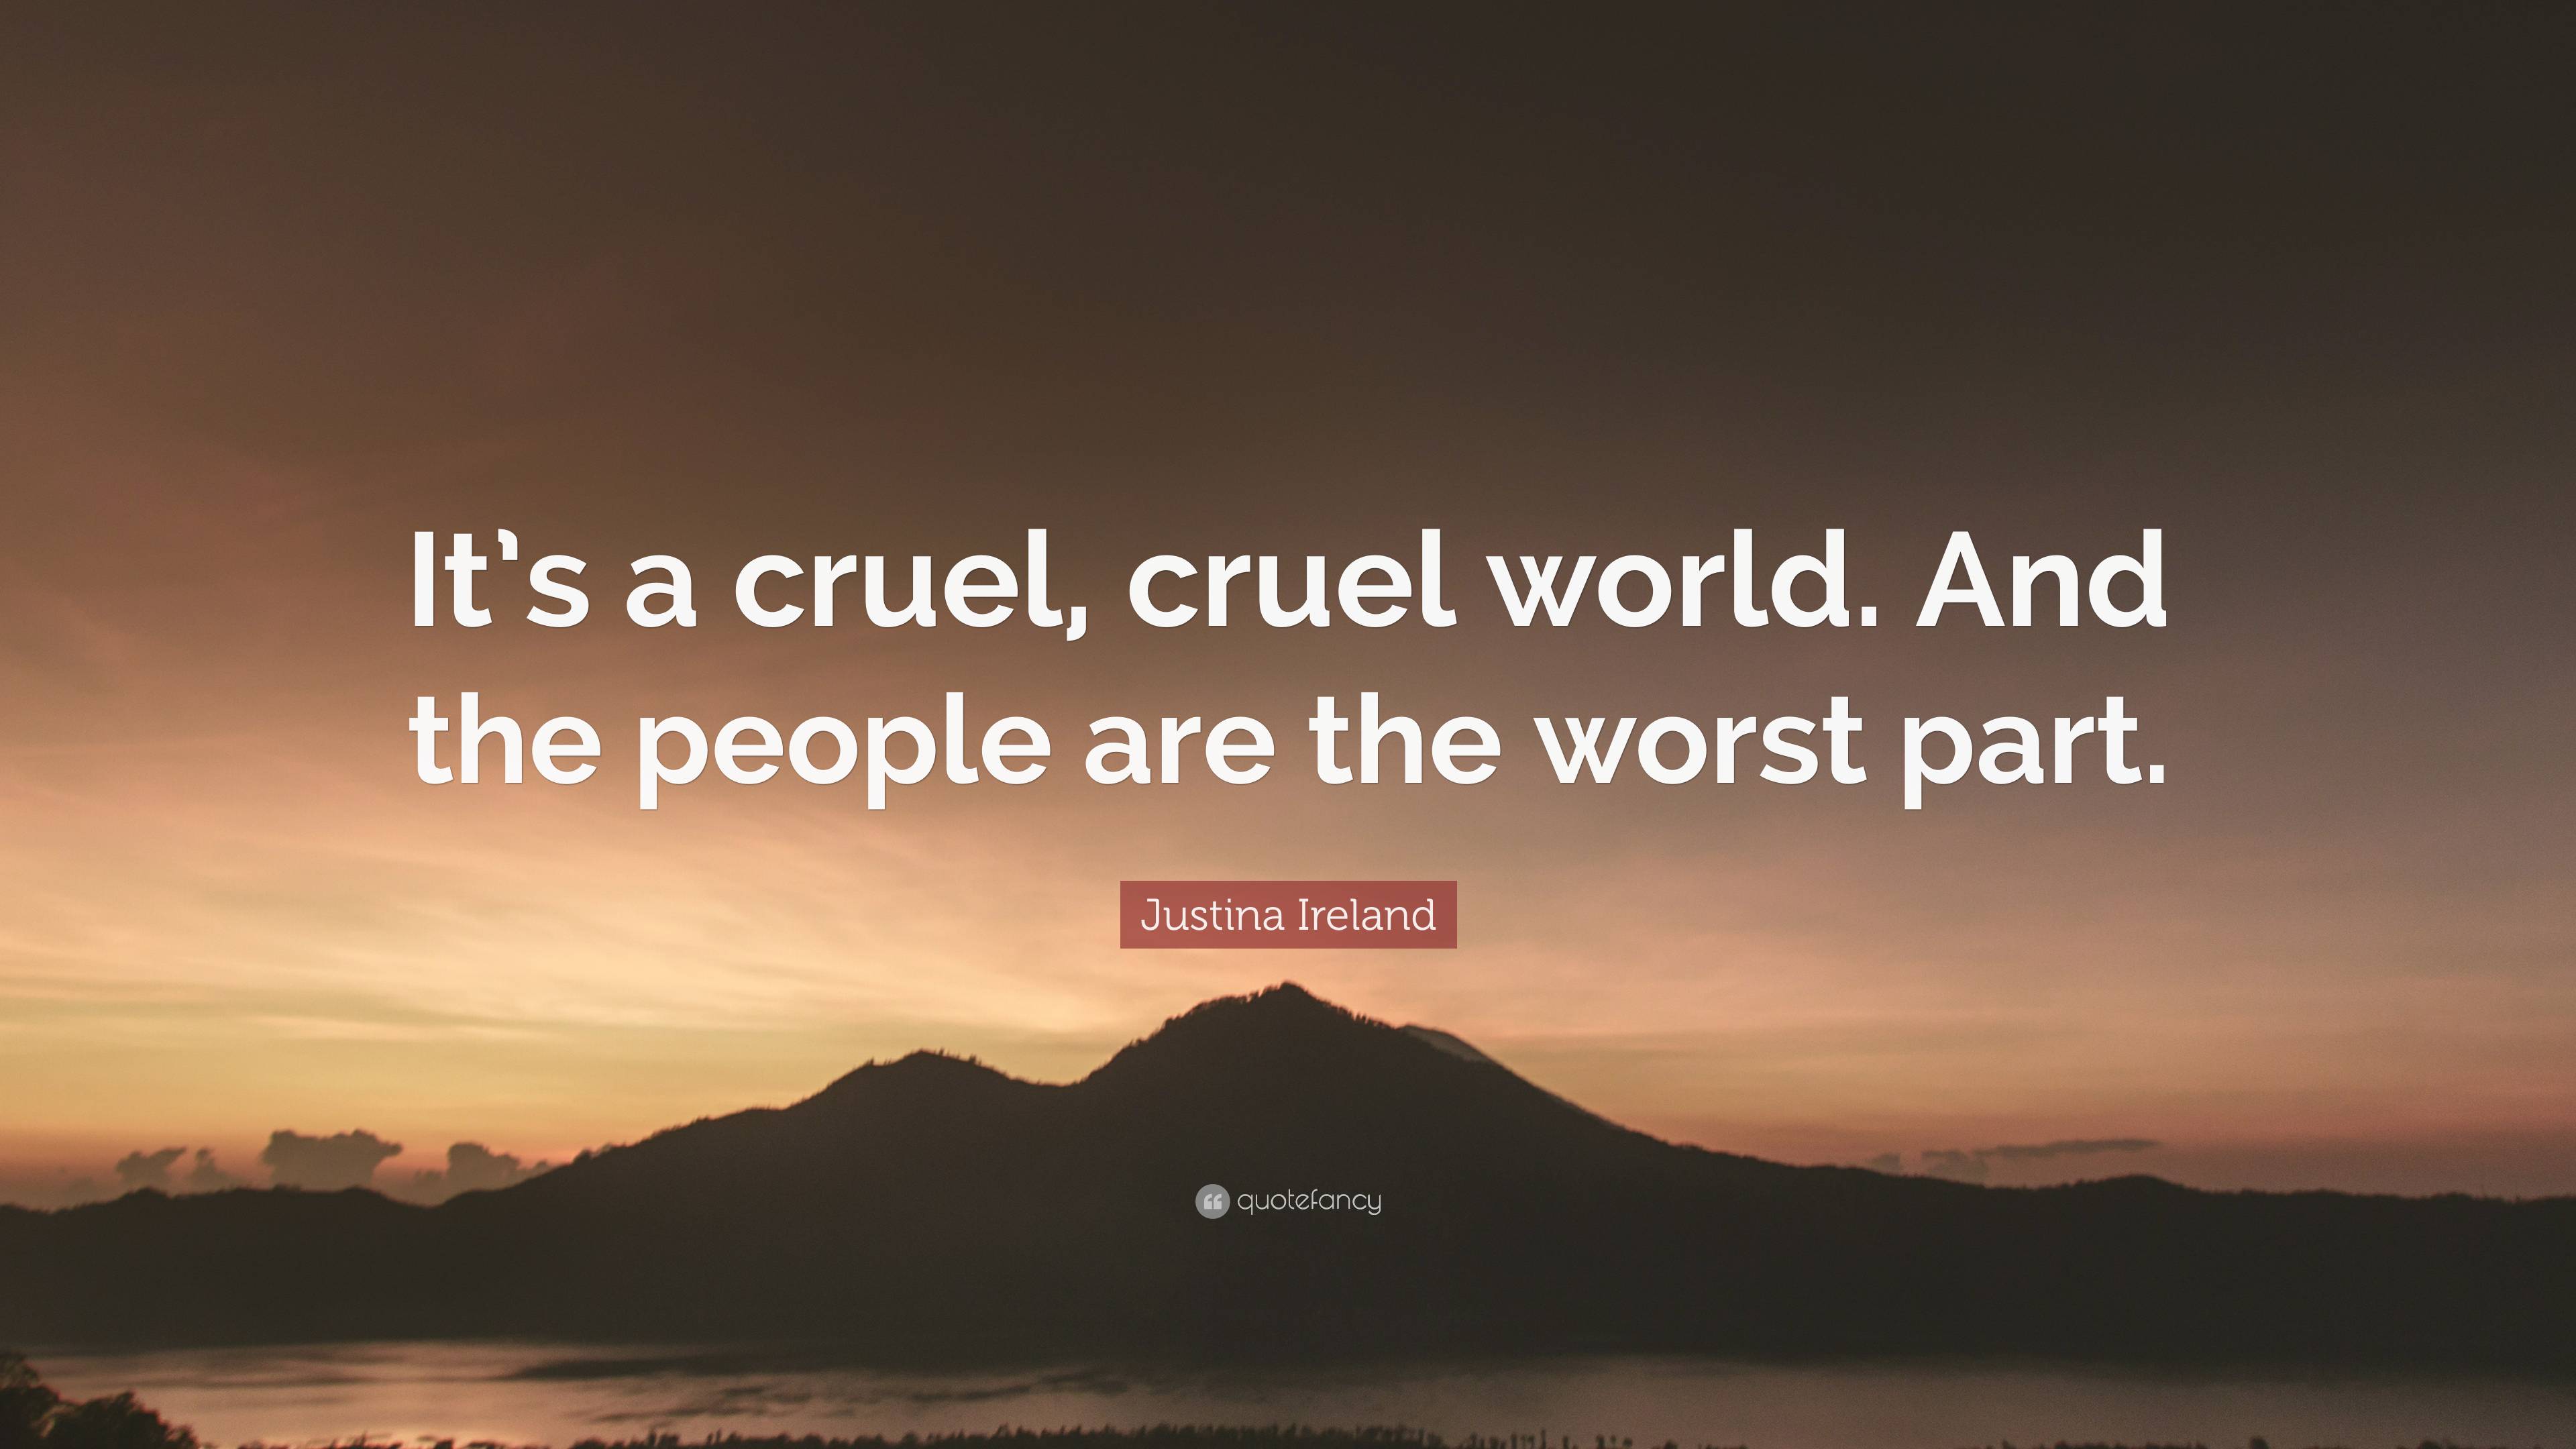 Justina Ireland Quote: “It's a cruel, cruel world. And the people are the  worst part.”